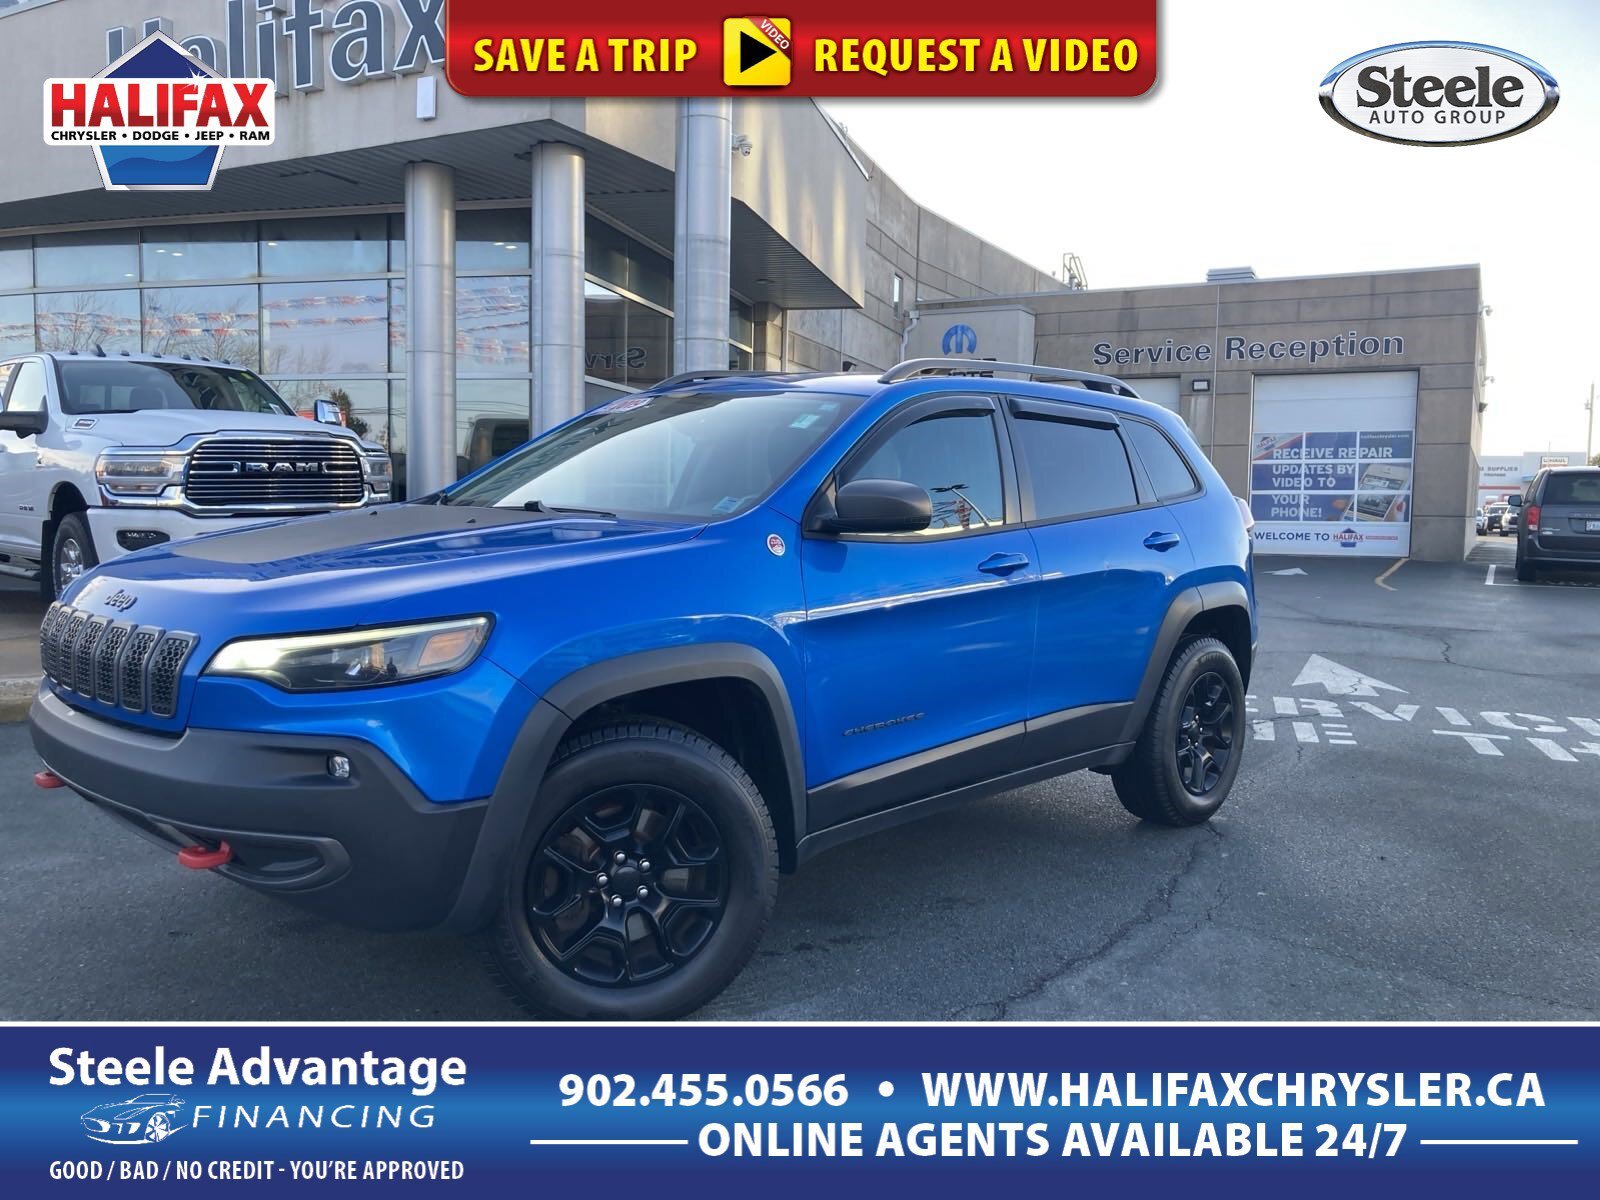 2019 Jeep Cherokee Trailhawk - HEATED LEATHER SEATS AND WHEEL, NAV, P